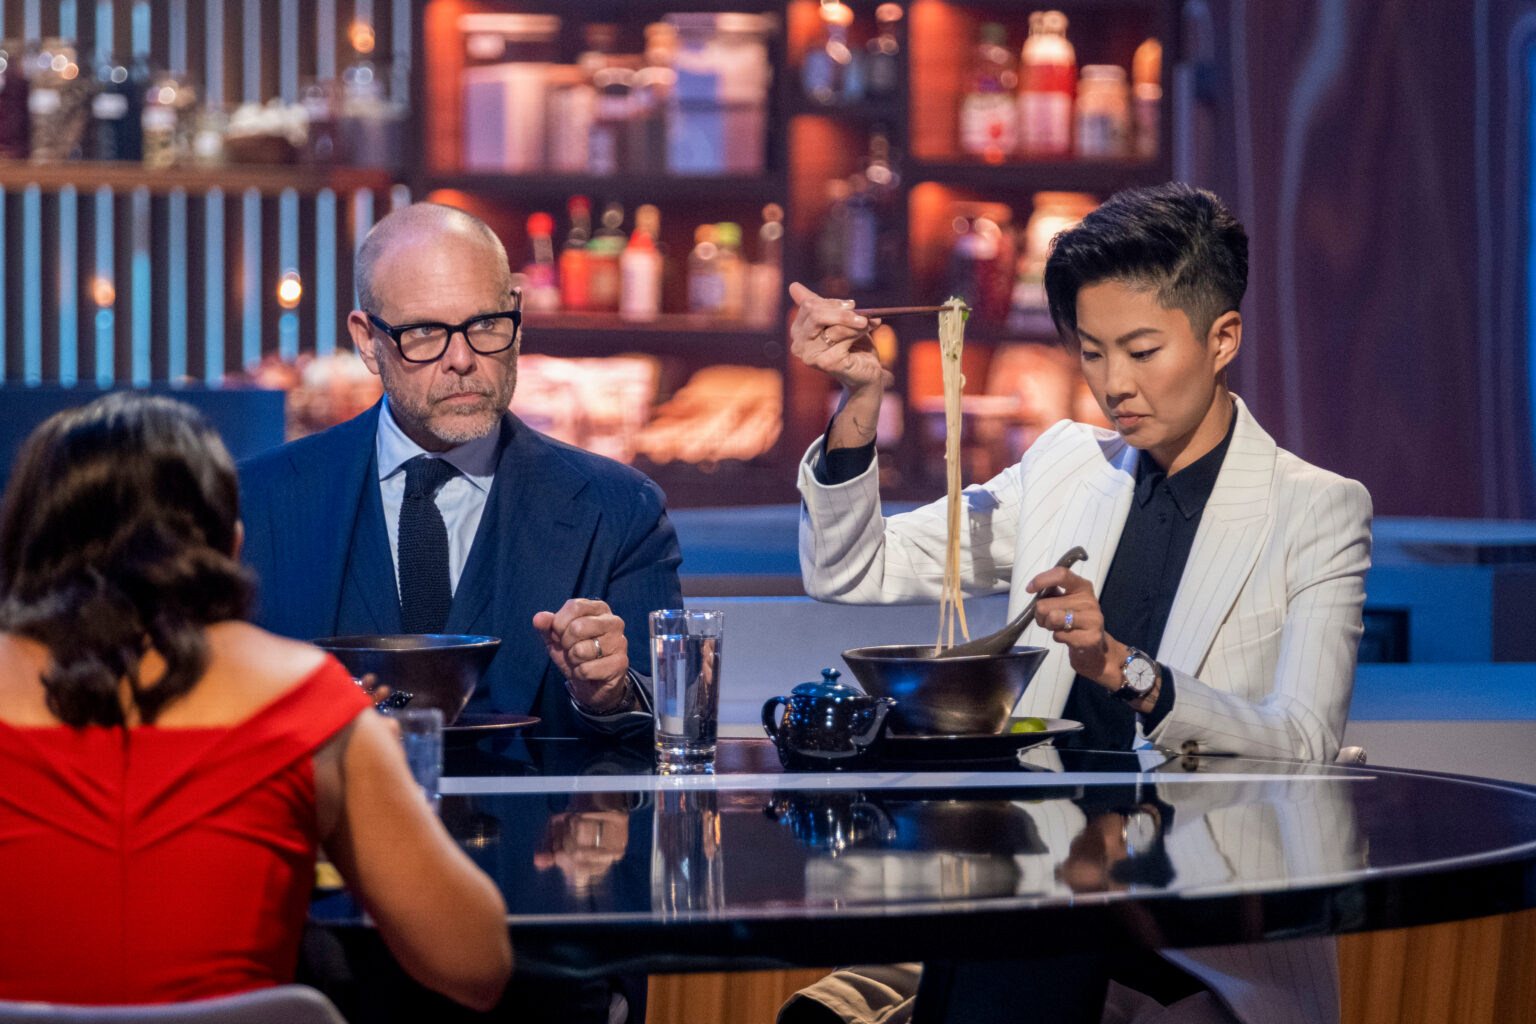 Kristen Kish Dishes on the 'Iron Chef' Reboot, Food Culture, and Travel